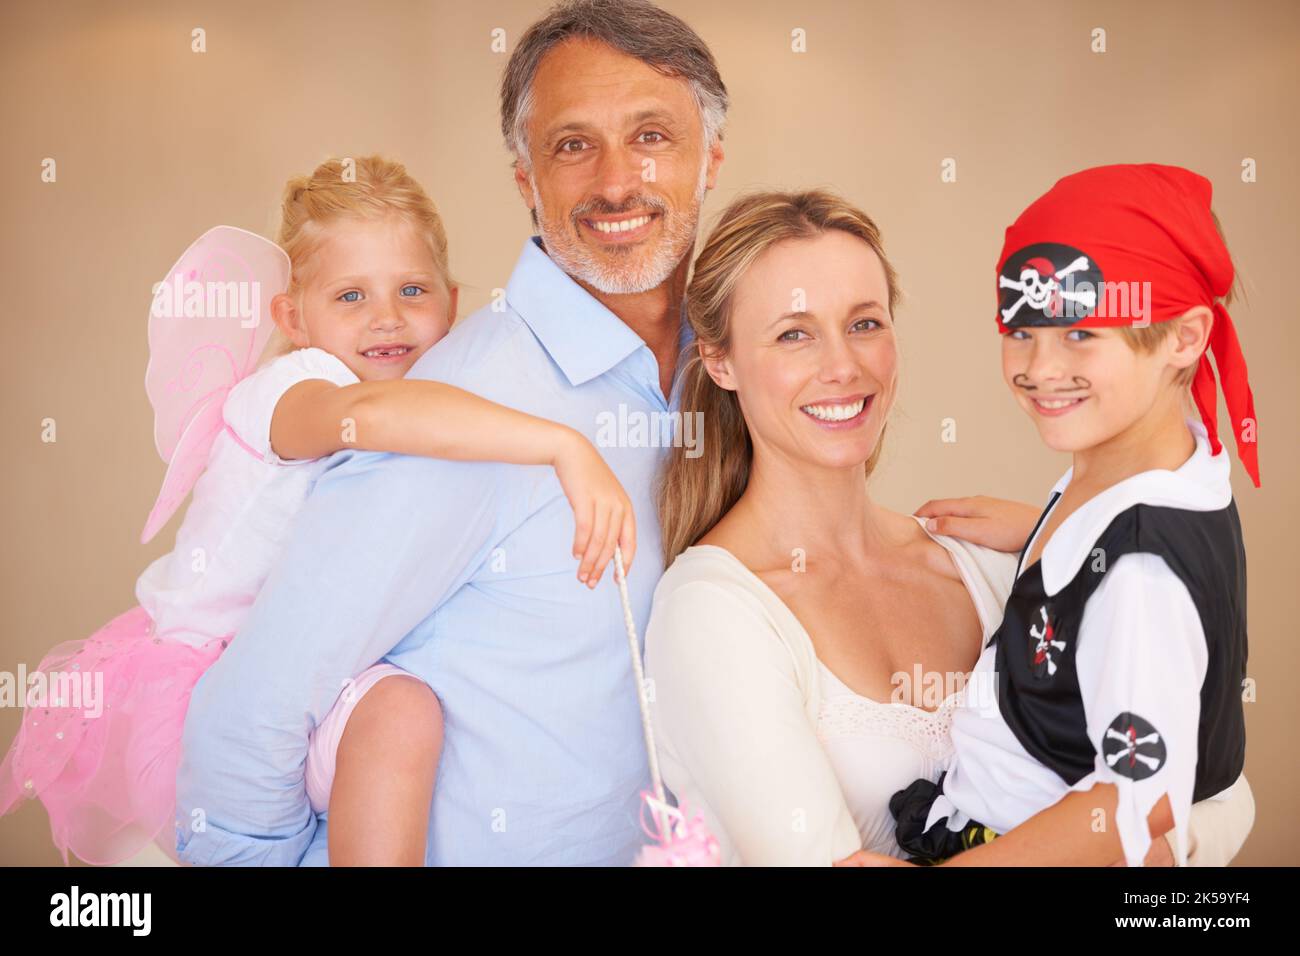 Portrait perfection. A family portrait of a father piggybacking his daughter and bother carrying her son on halloween. Stock Photo